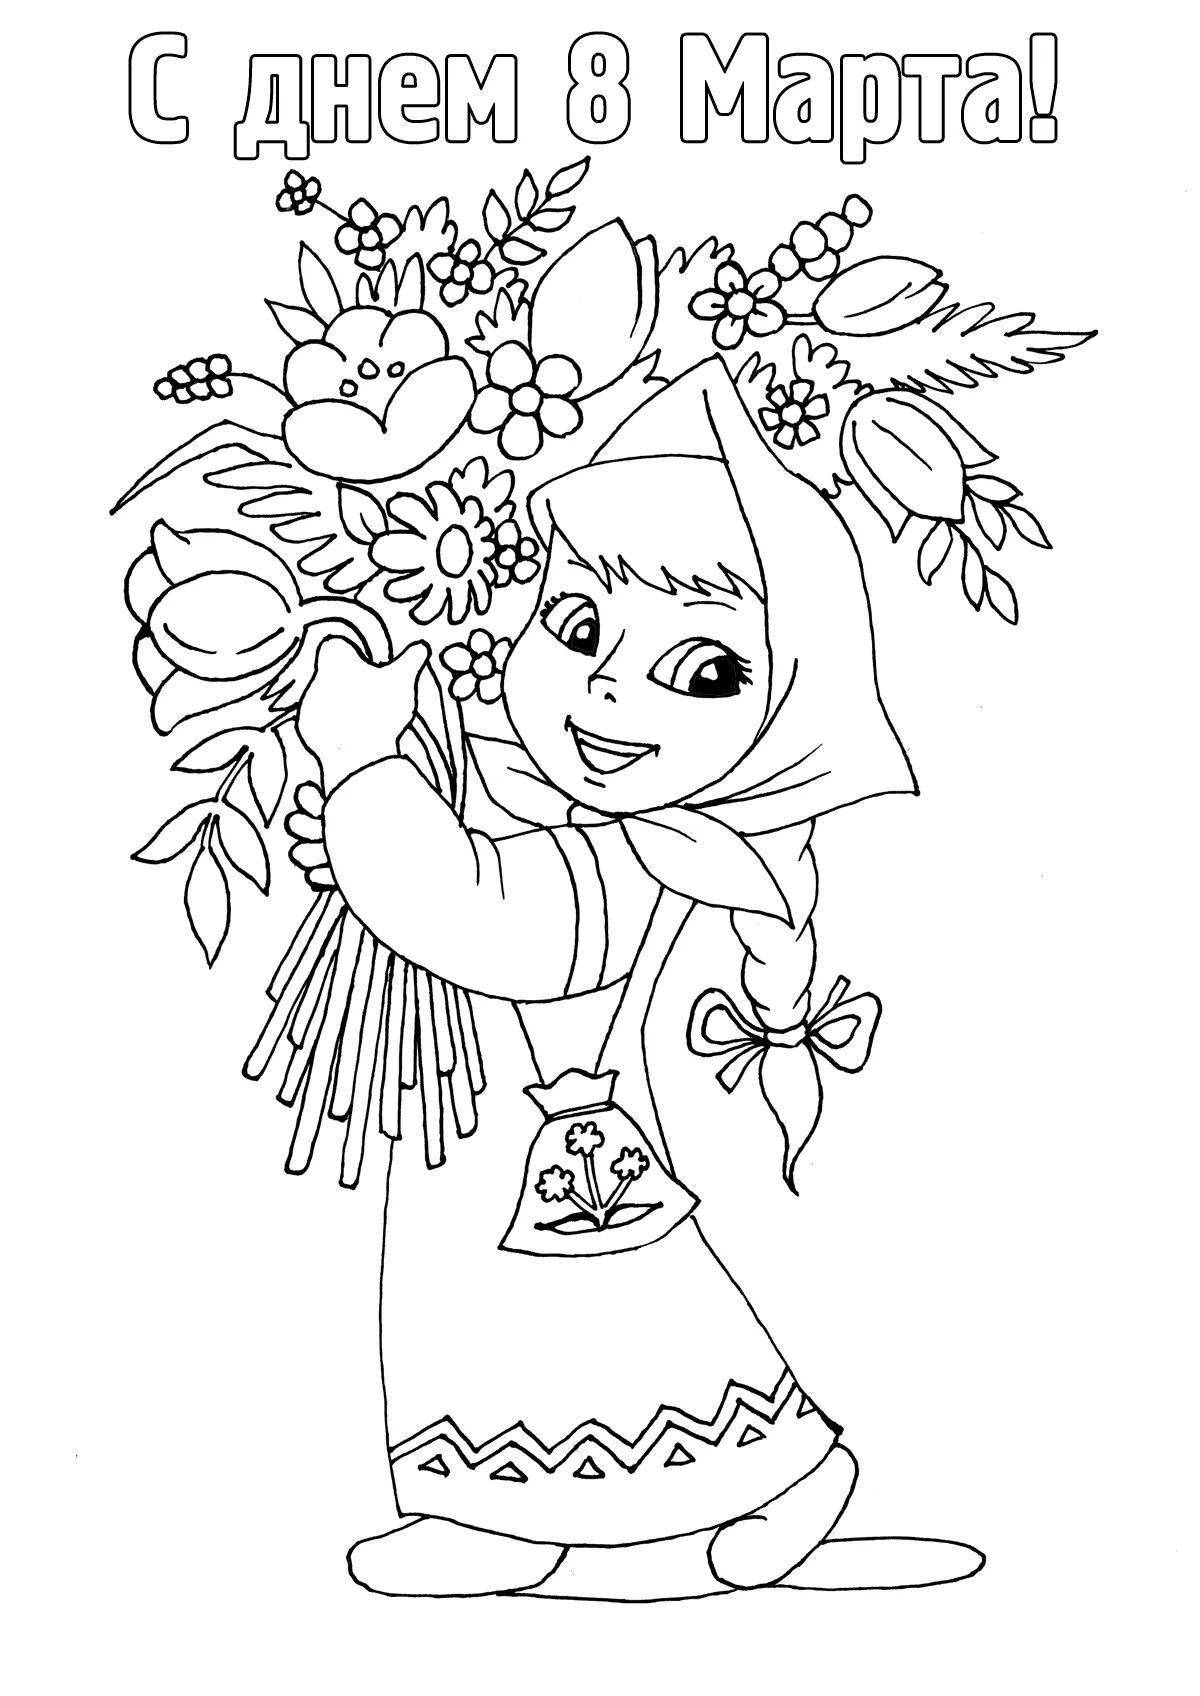 March 8 holiday coloring page